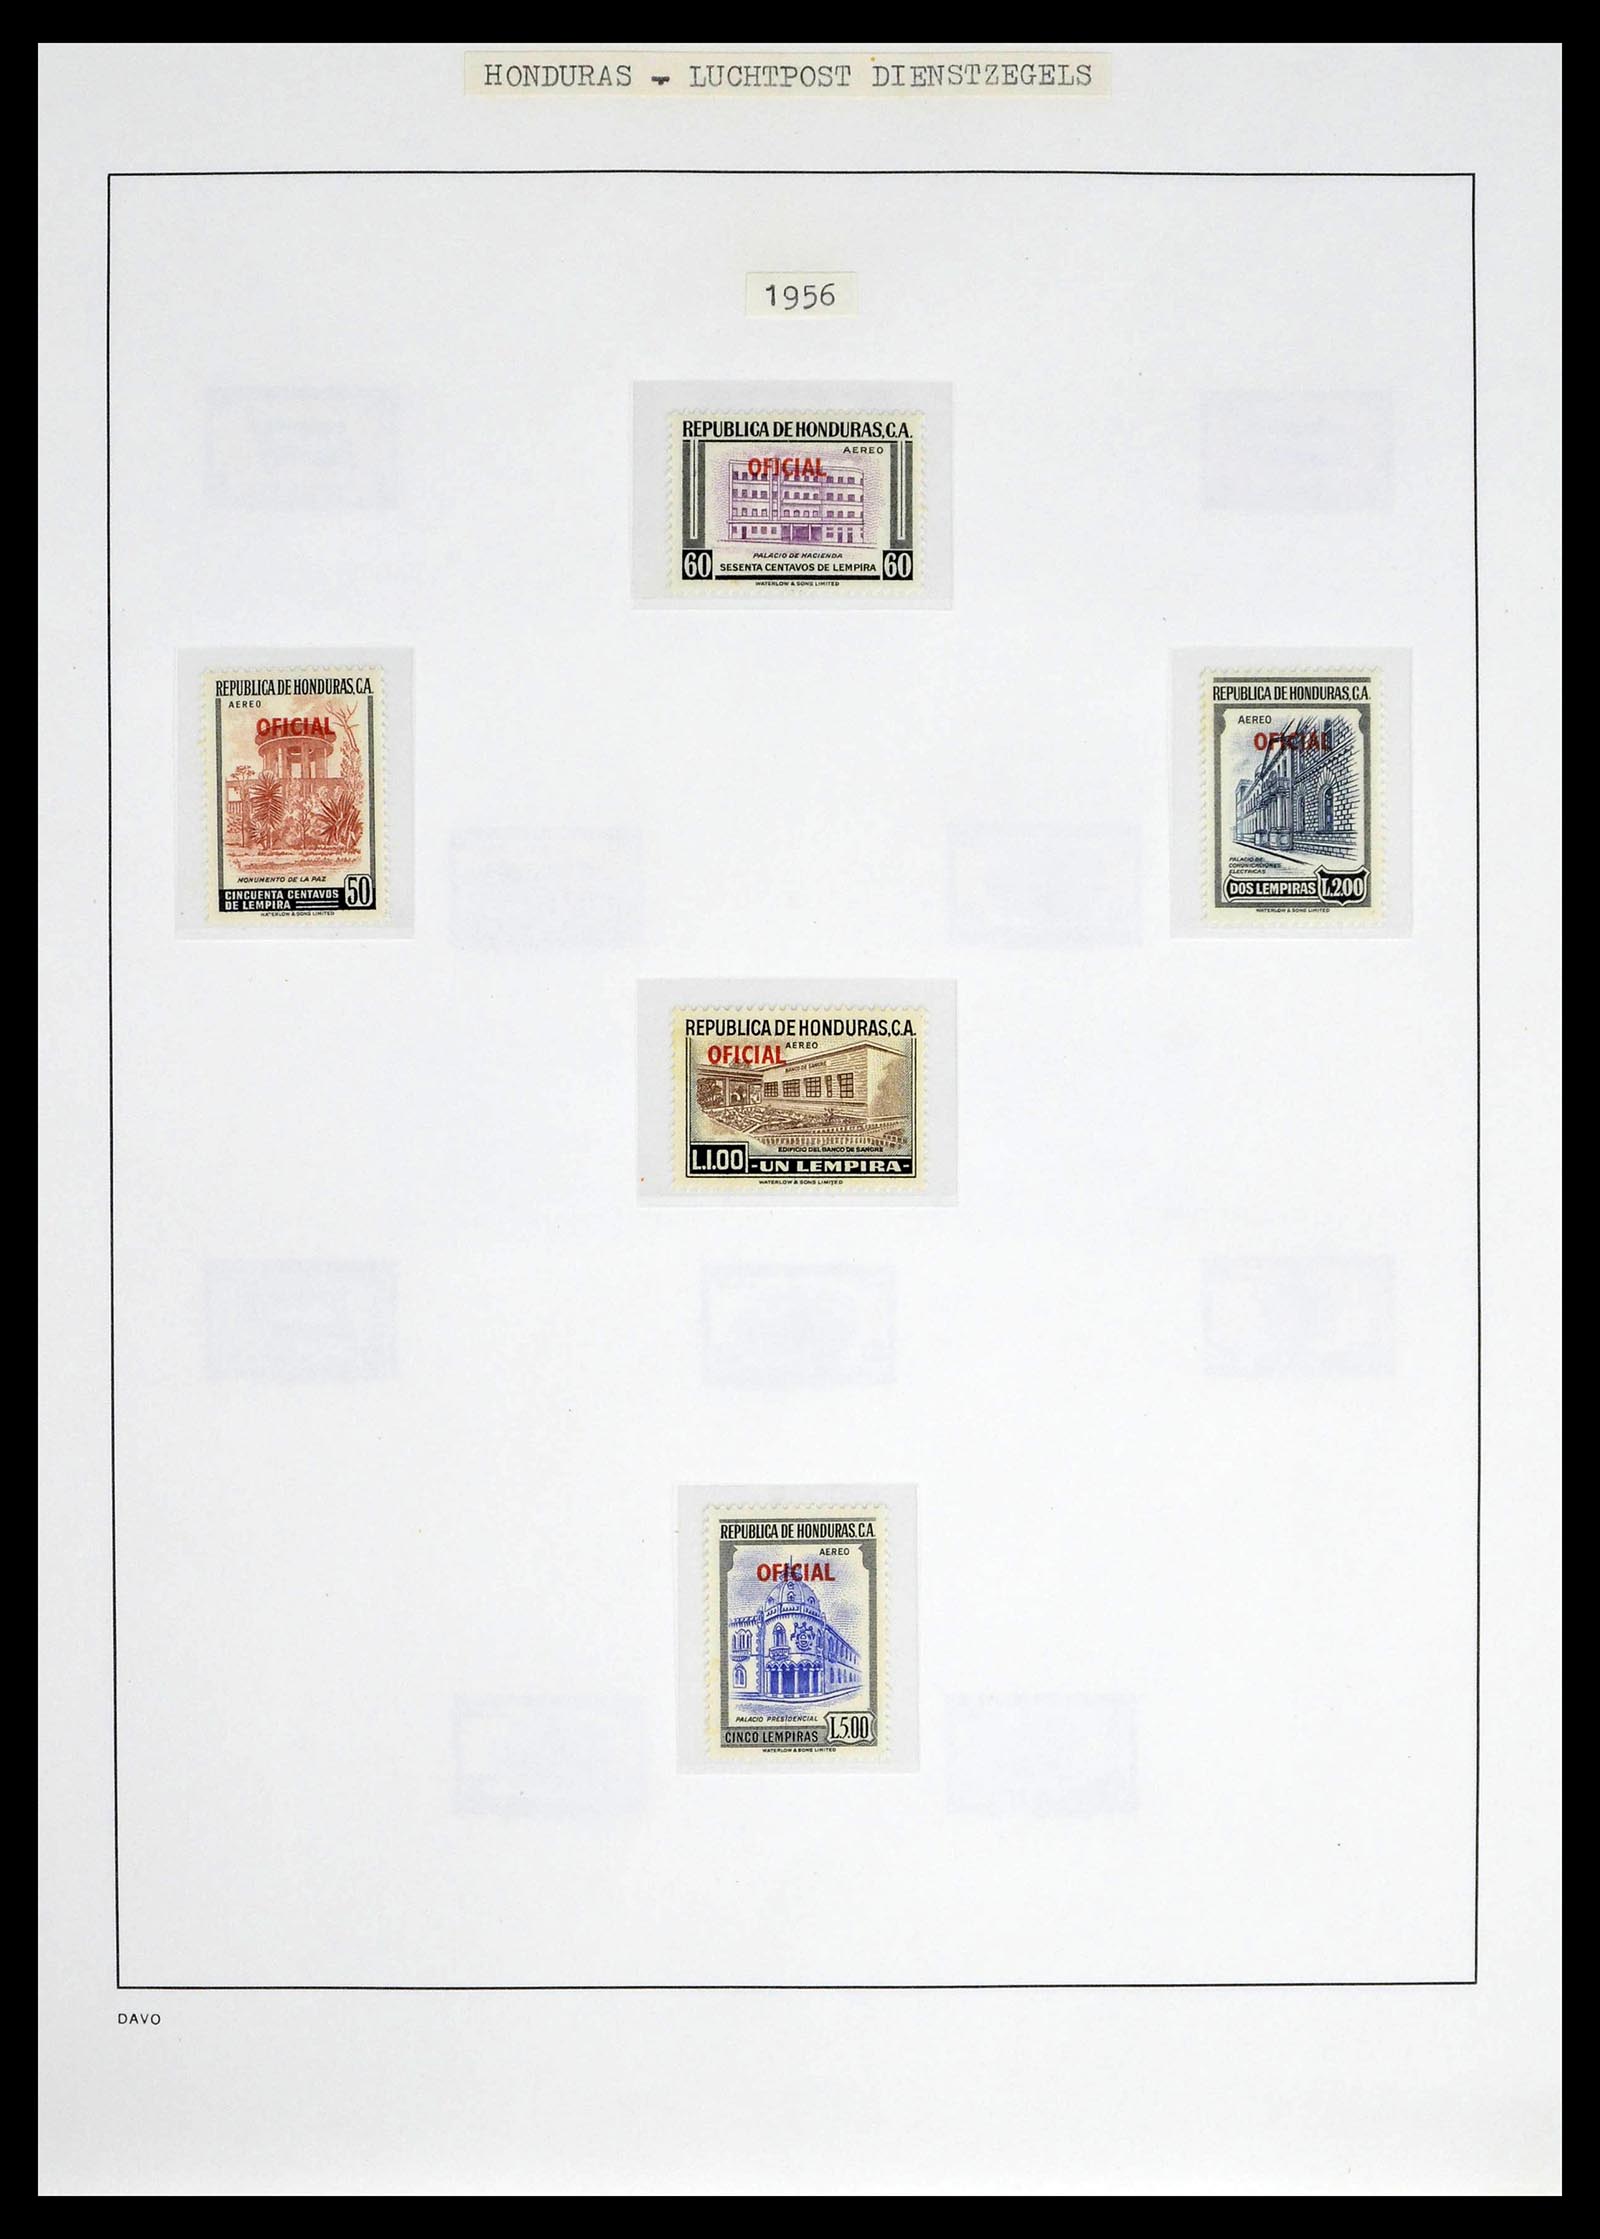 39404 0035 - Stamp collection 39404 Honduras service stamps 1890-1974.